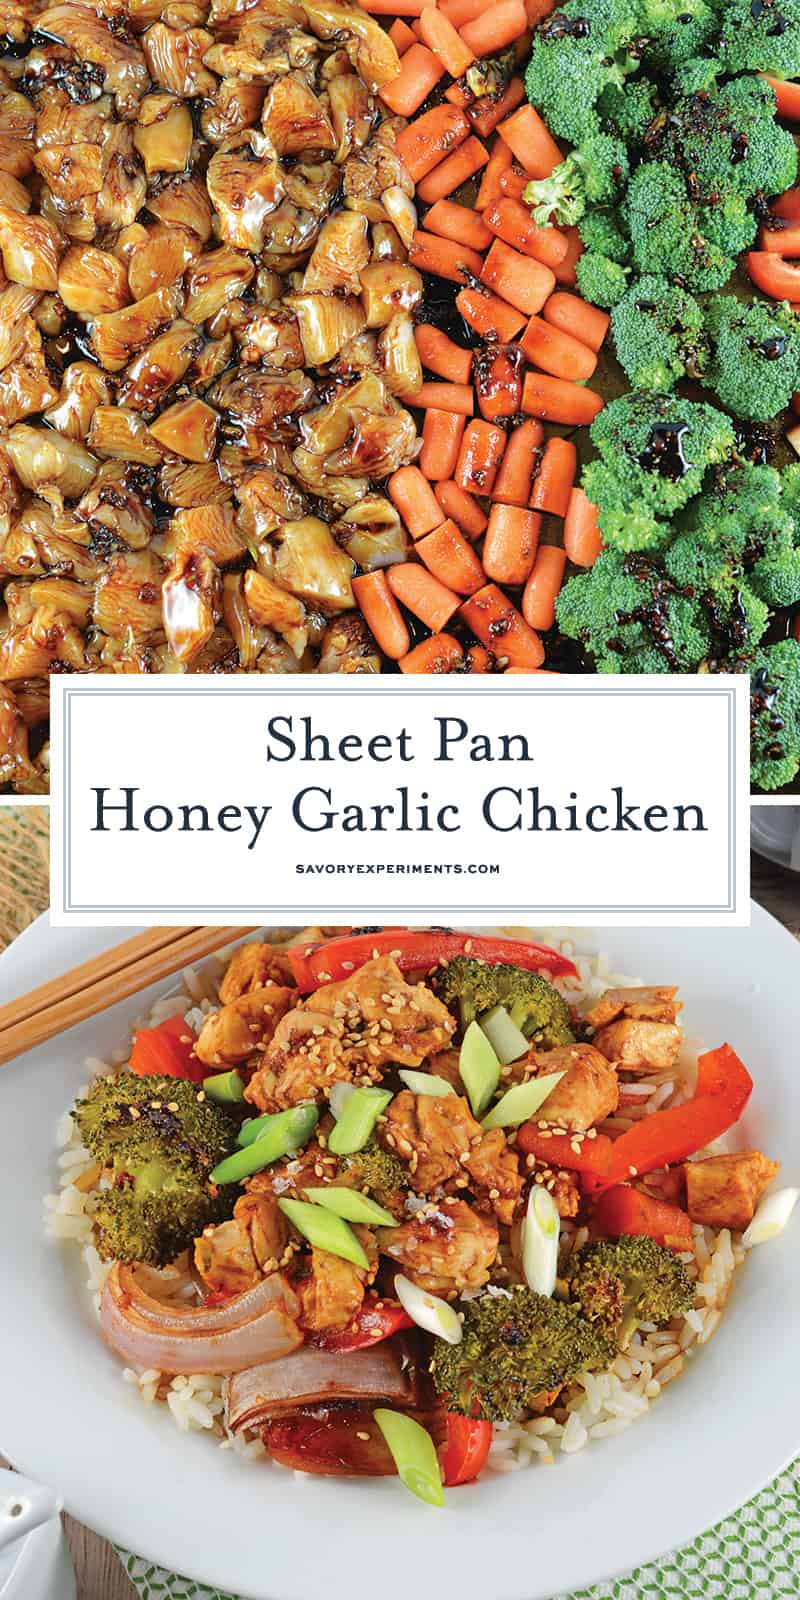 Sheet Pan Honey Garlic Chicken is an easy sheet pan dinner that's packed with flavor. An easy chicken recipe ready in just 30 minutes. #sheetpanmeals #honeygarlicchicken #easychickenrecipe www.savoryexperiments.com